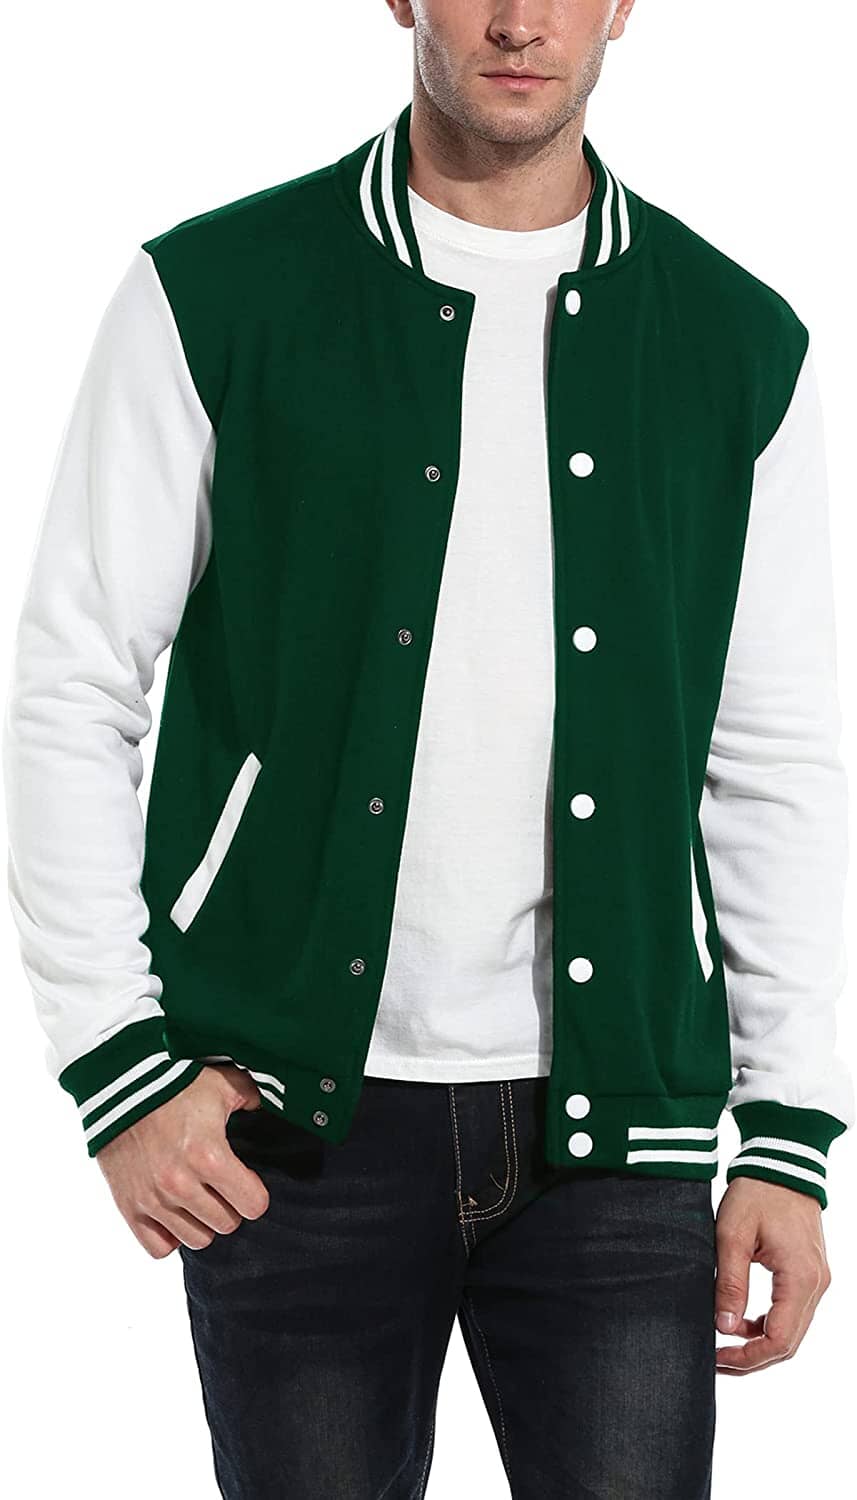 Fashion Varsity Cotton Bomber Jackets (US Only) Jackets COOFANDY Store Green S 